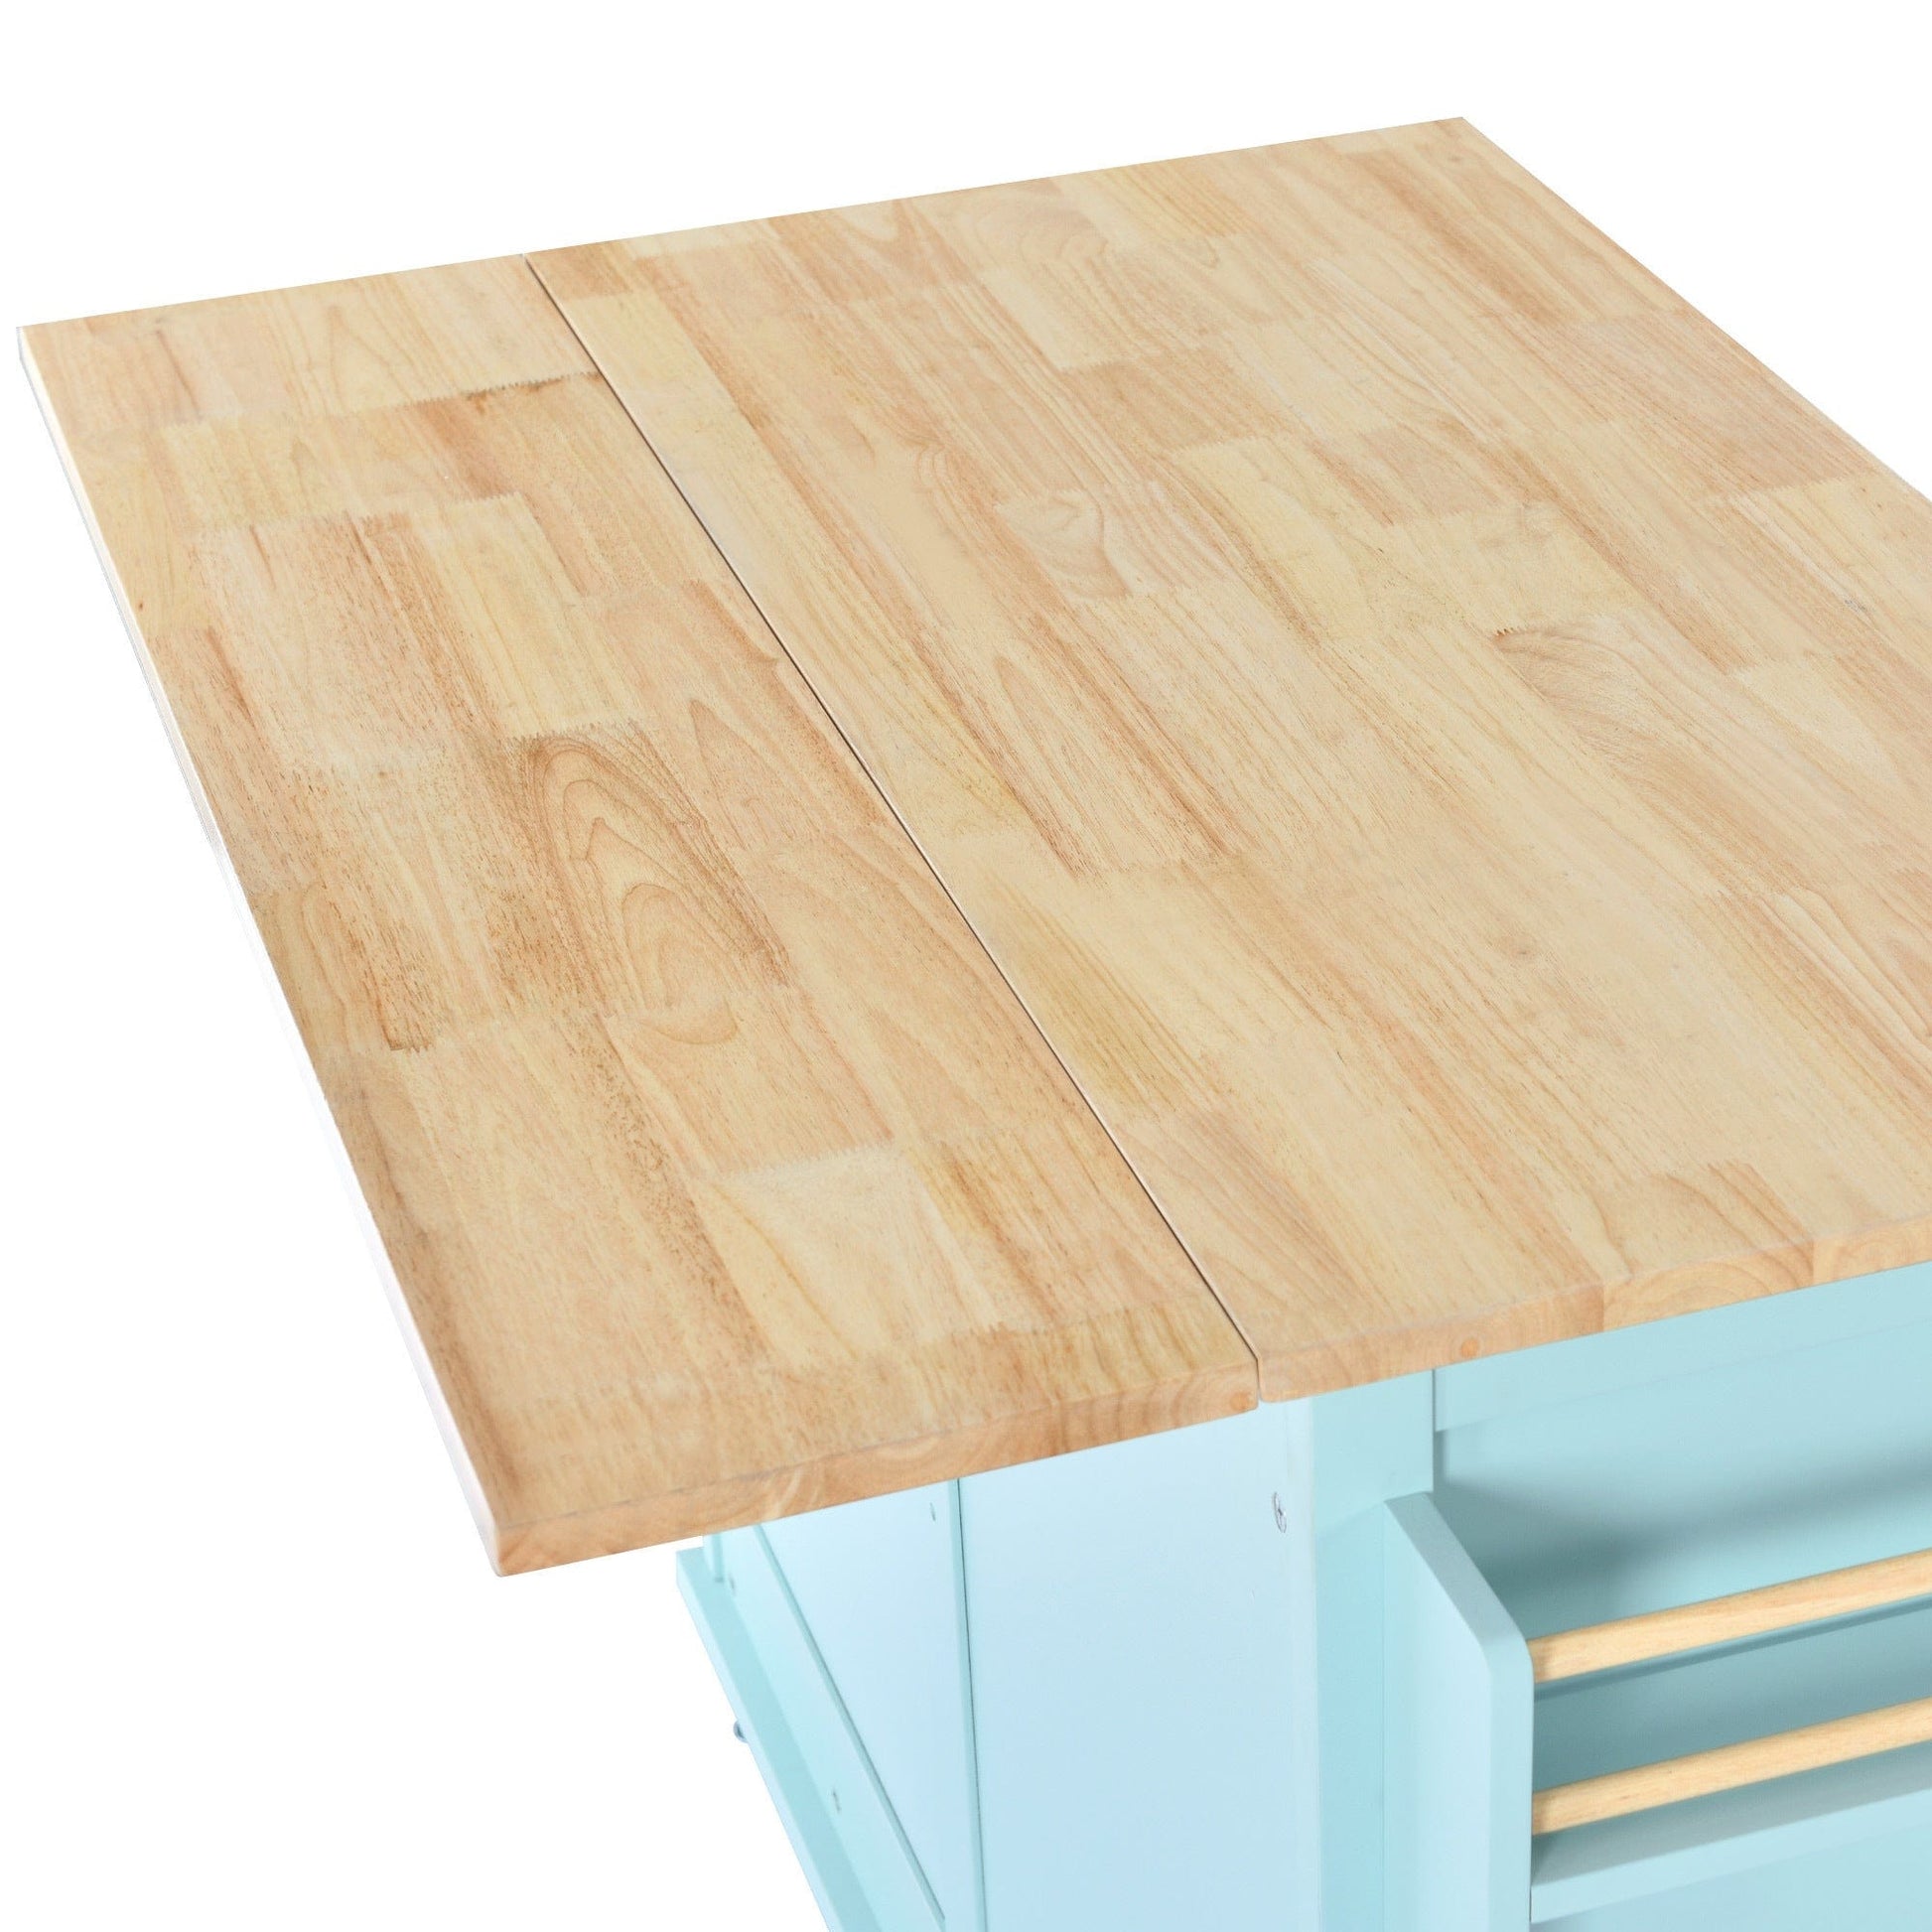 1st Choice Furniture Direct Kitchen Cart 1st Choice Mint Green Kitchen Cart with Drop-Leaf Countertop